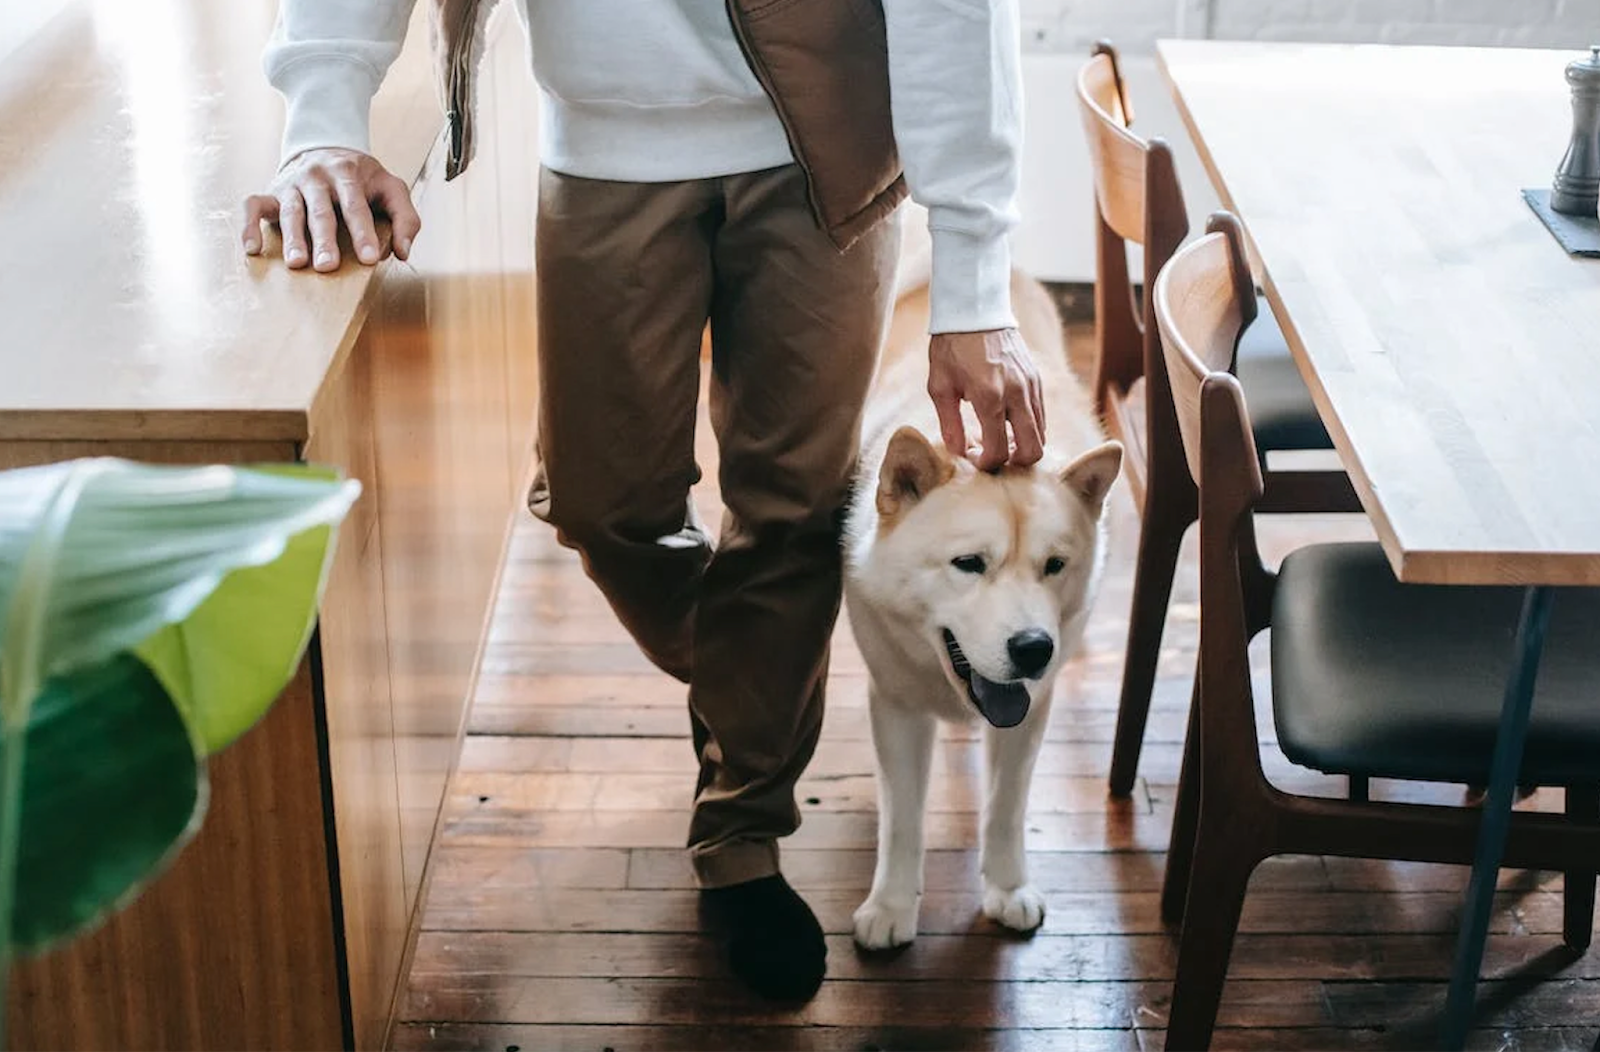 An owner petting a dog in the kitchen of a pet-friendly accommodation.